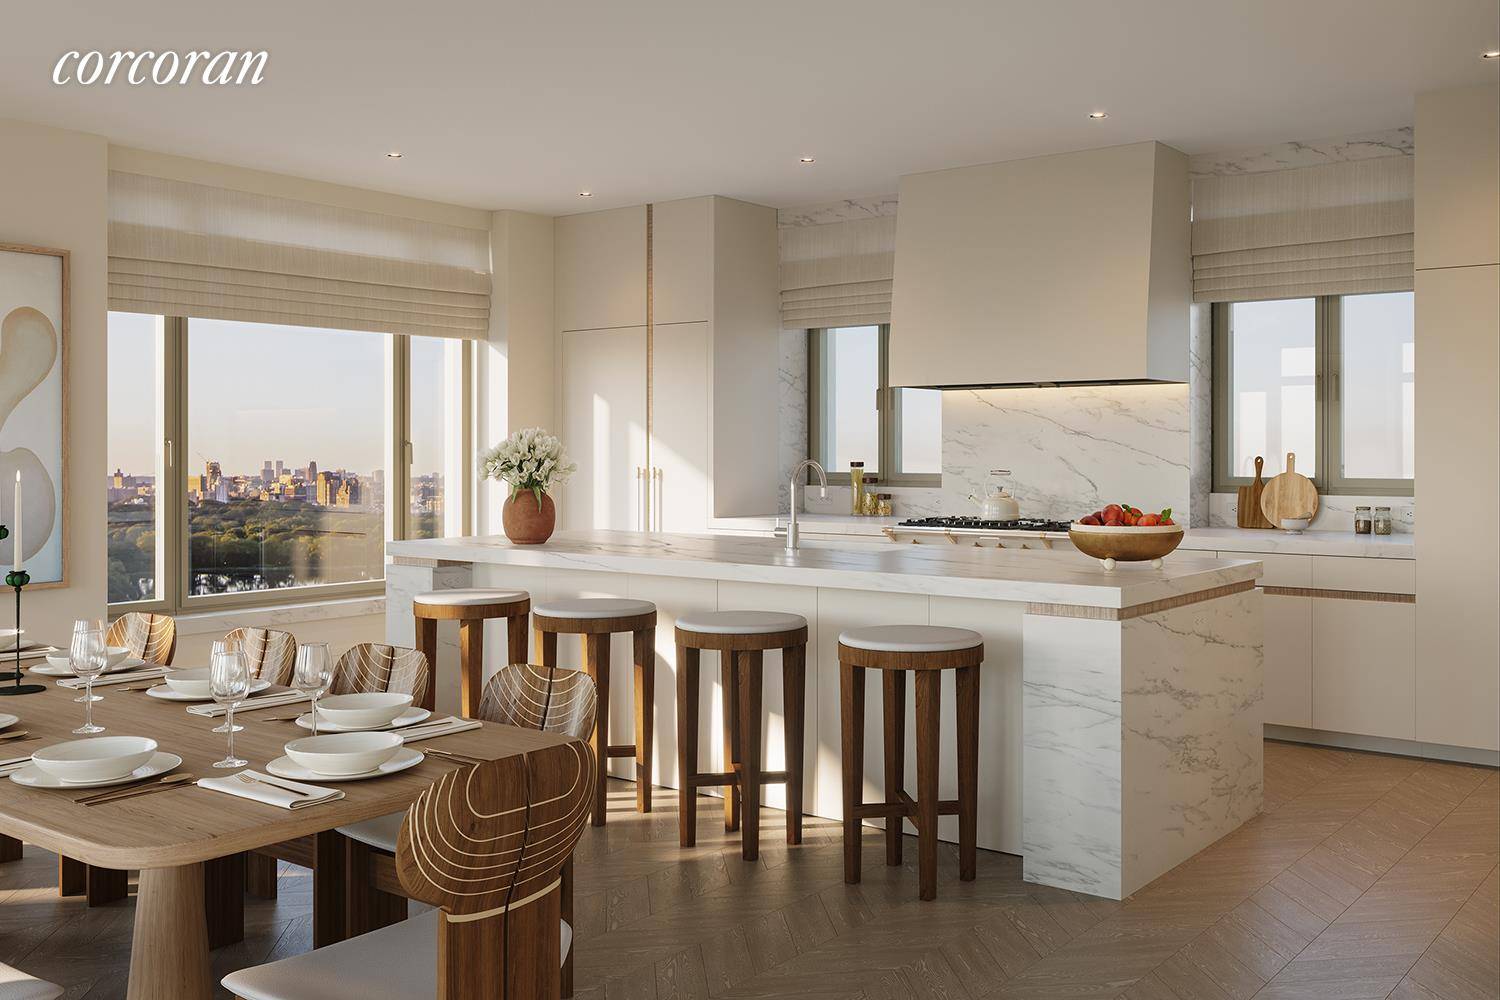 The Duplex Penthouse at 1228 Madison Avenue is a 6 bedroom home with breathtaking uninterrupted views of Central Park and the Jacqueline Kennedy Onassis Reservoir as well as the Midtown ...